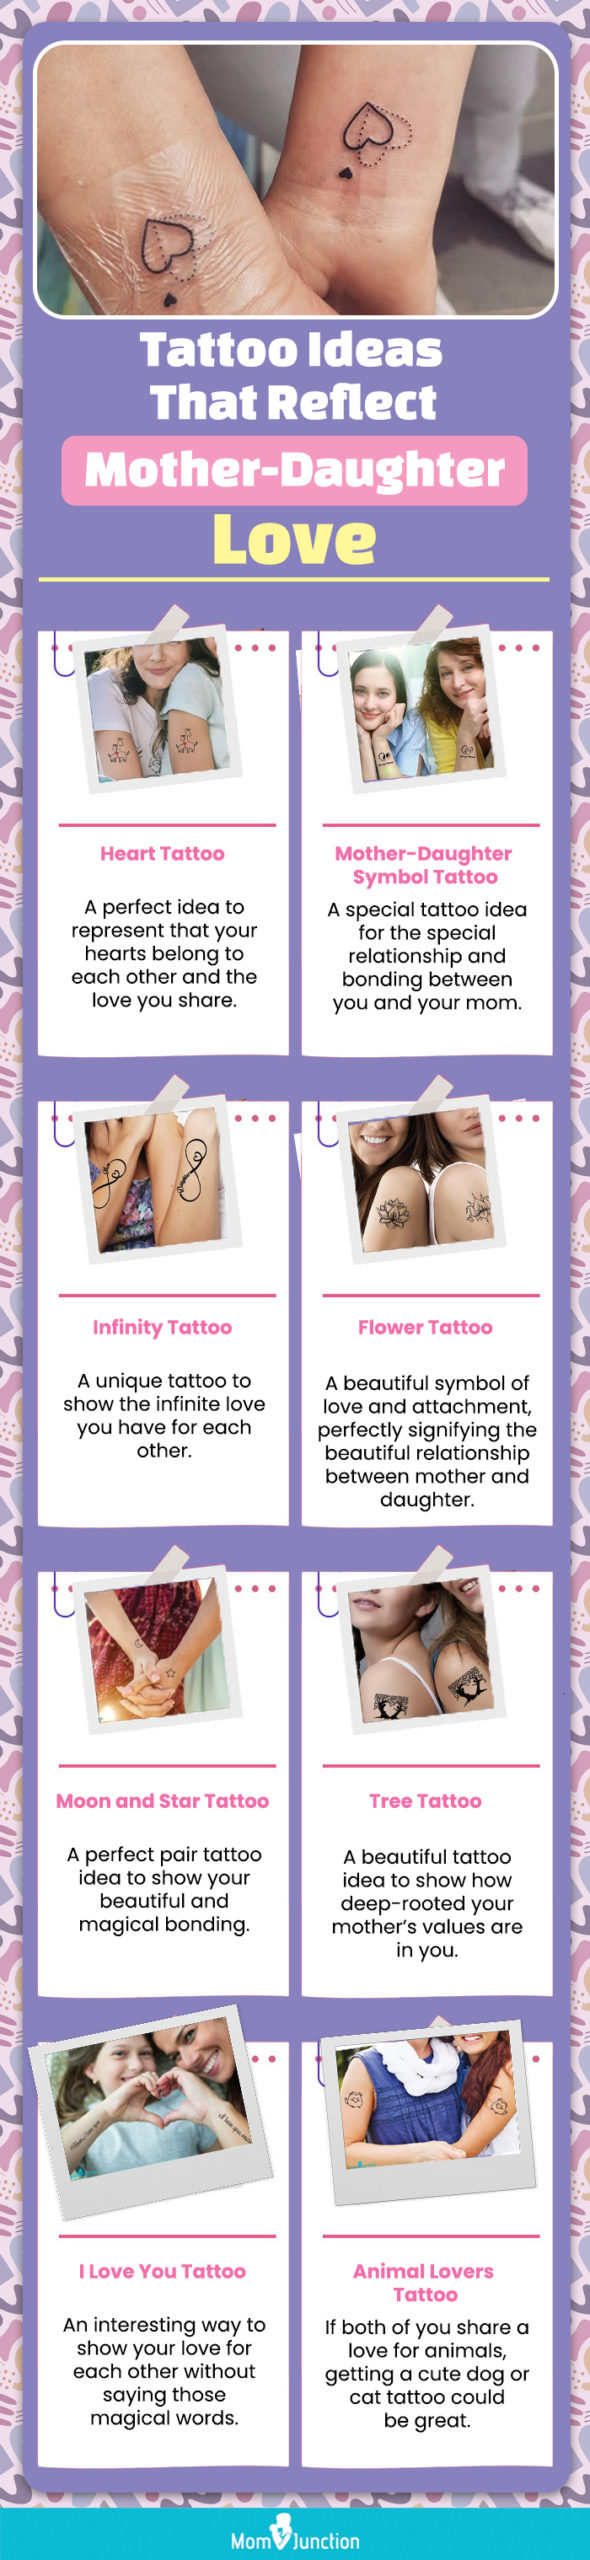 tattoo ideas that reflect mother daughter love (infographic)